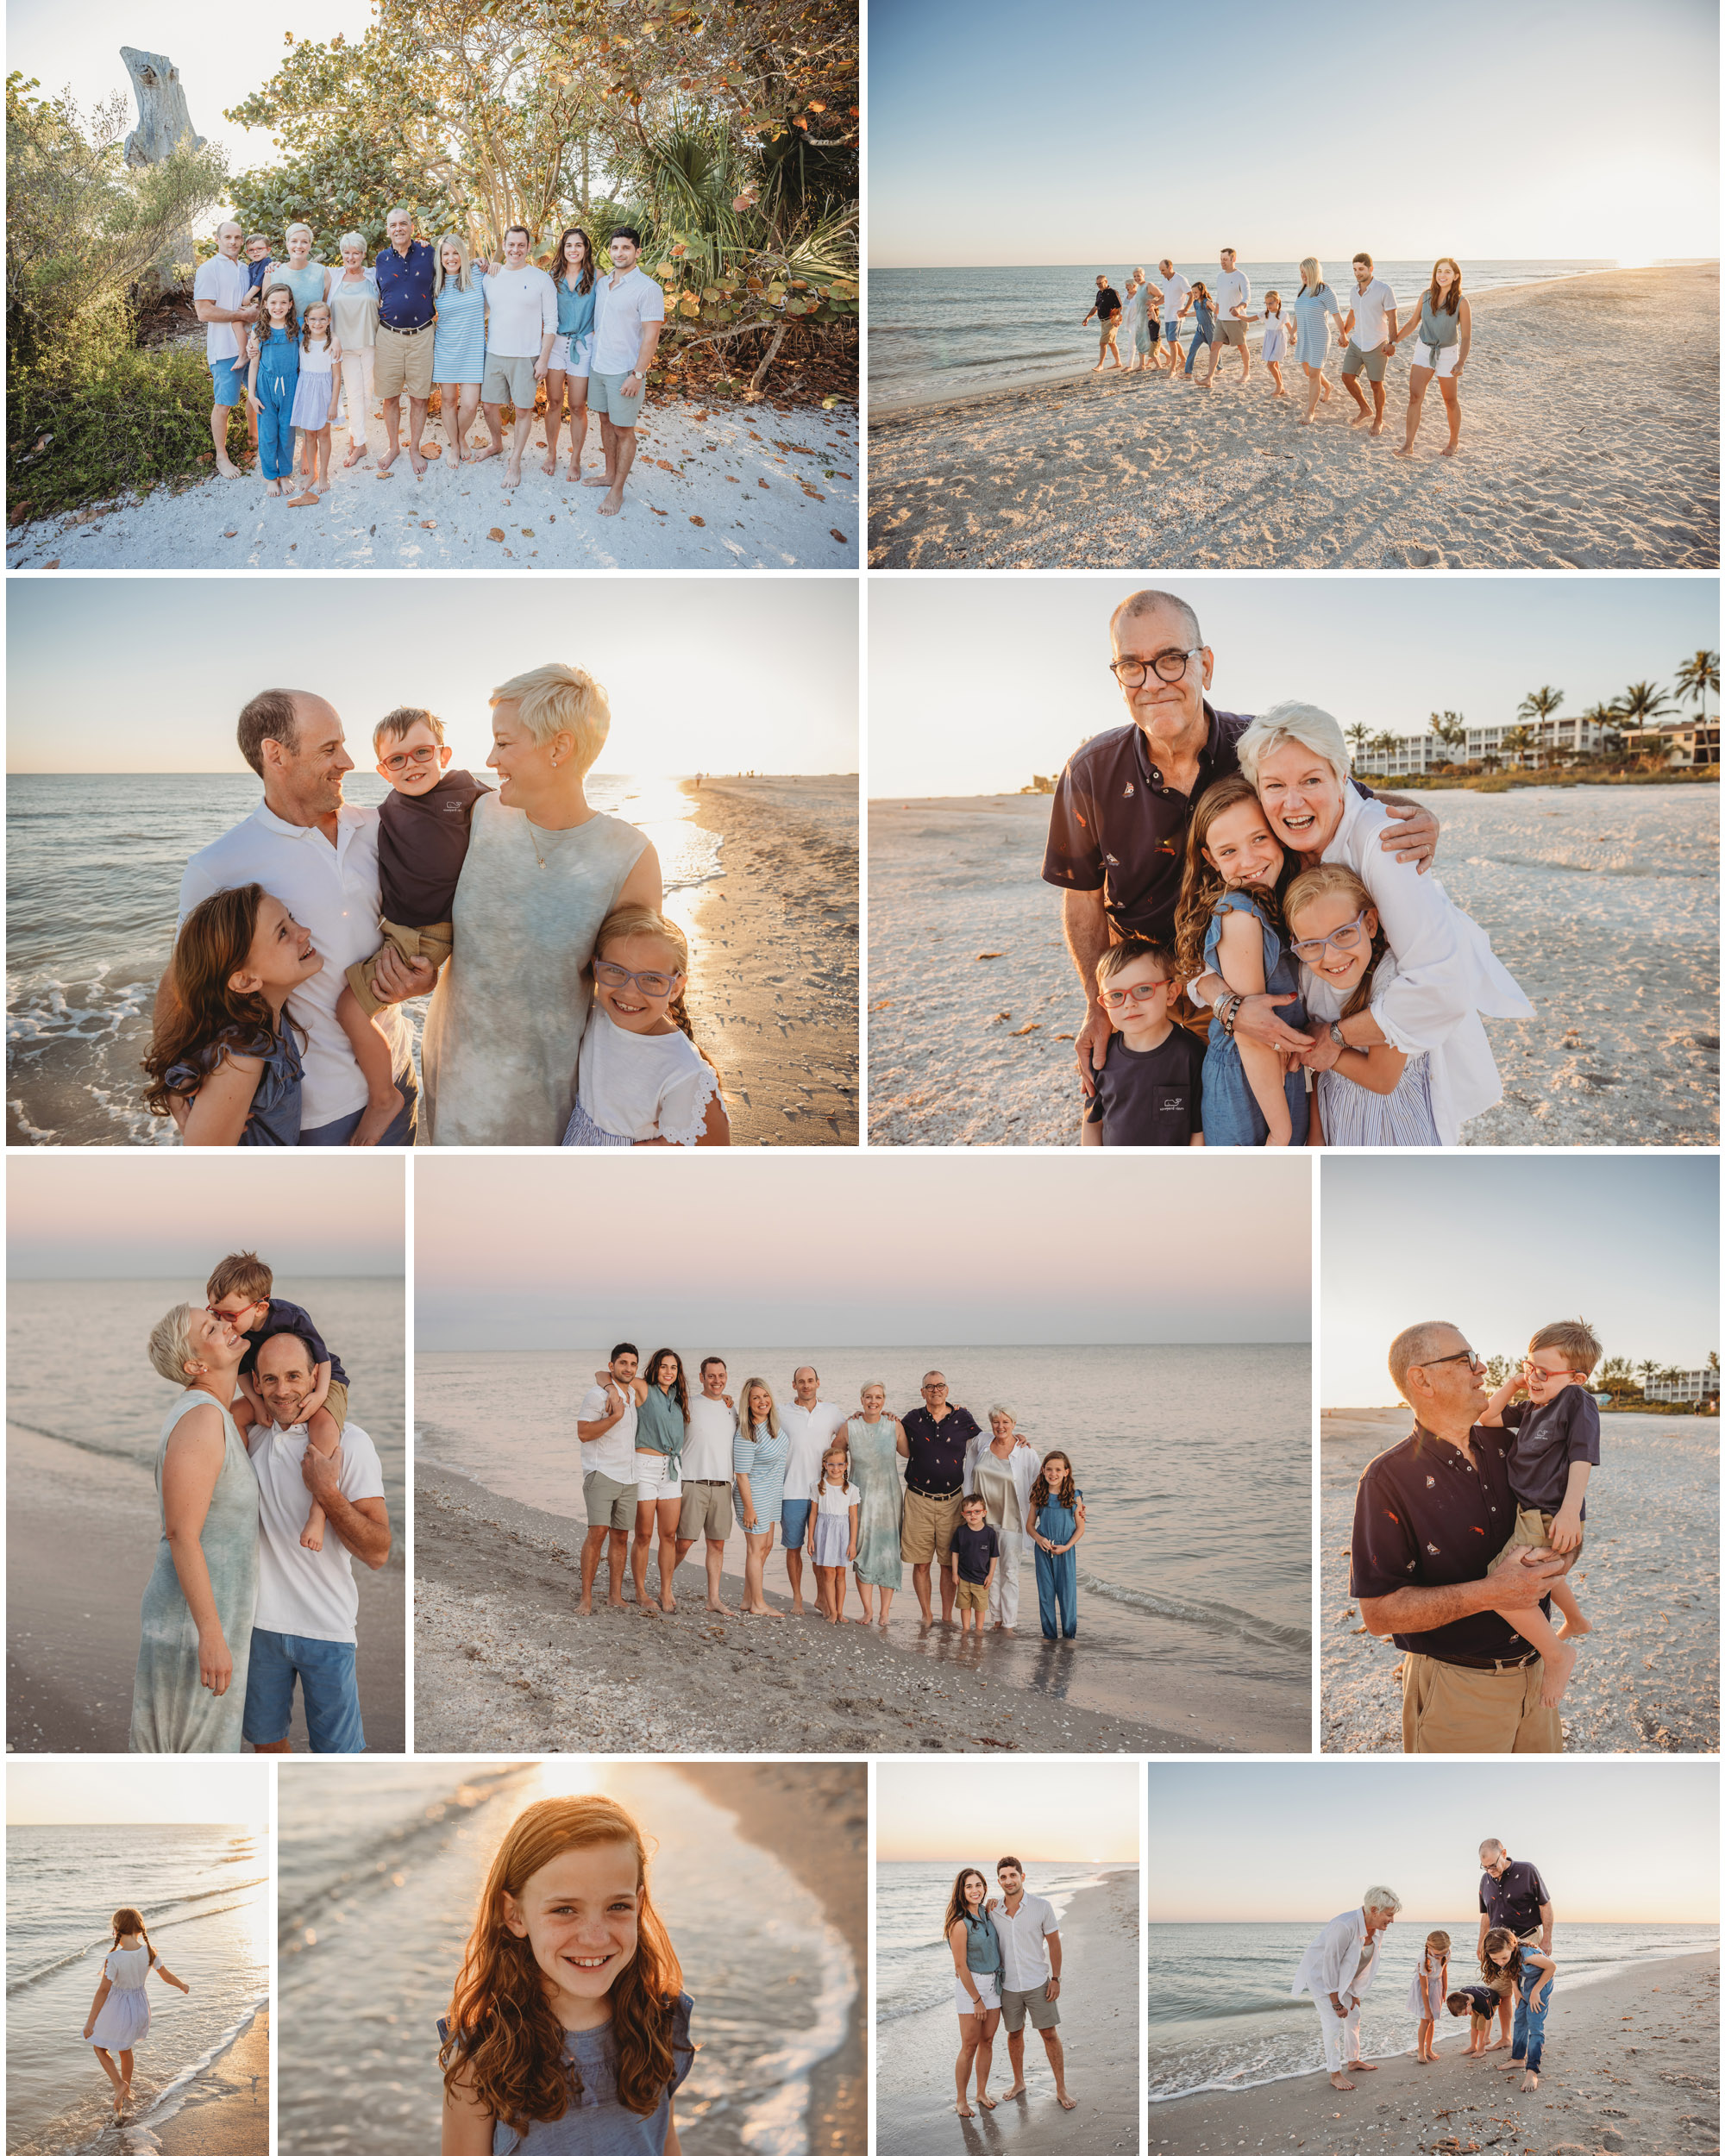 A big family photo shoot on the beach near Periwinkle Place on Sanibel. Large family on a deserted island beach at sunset.